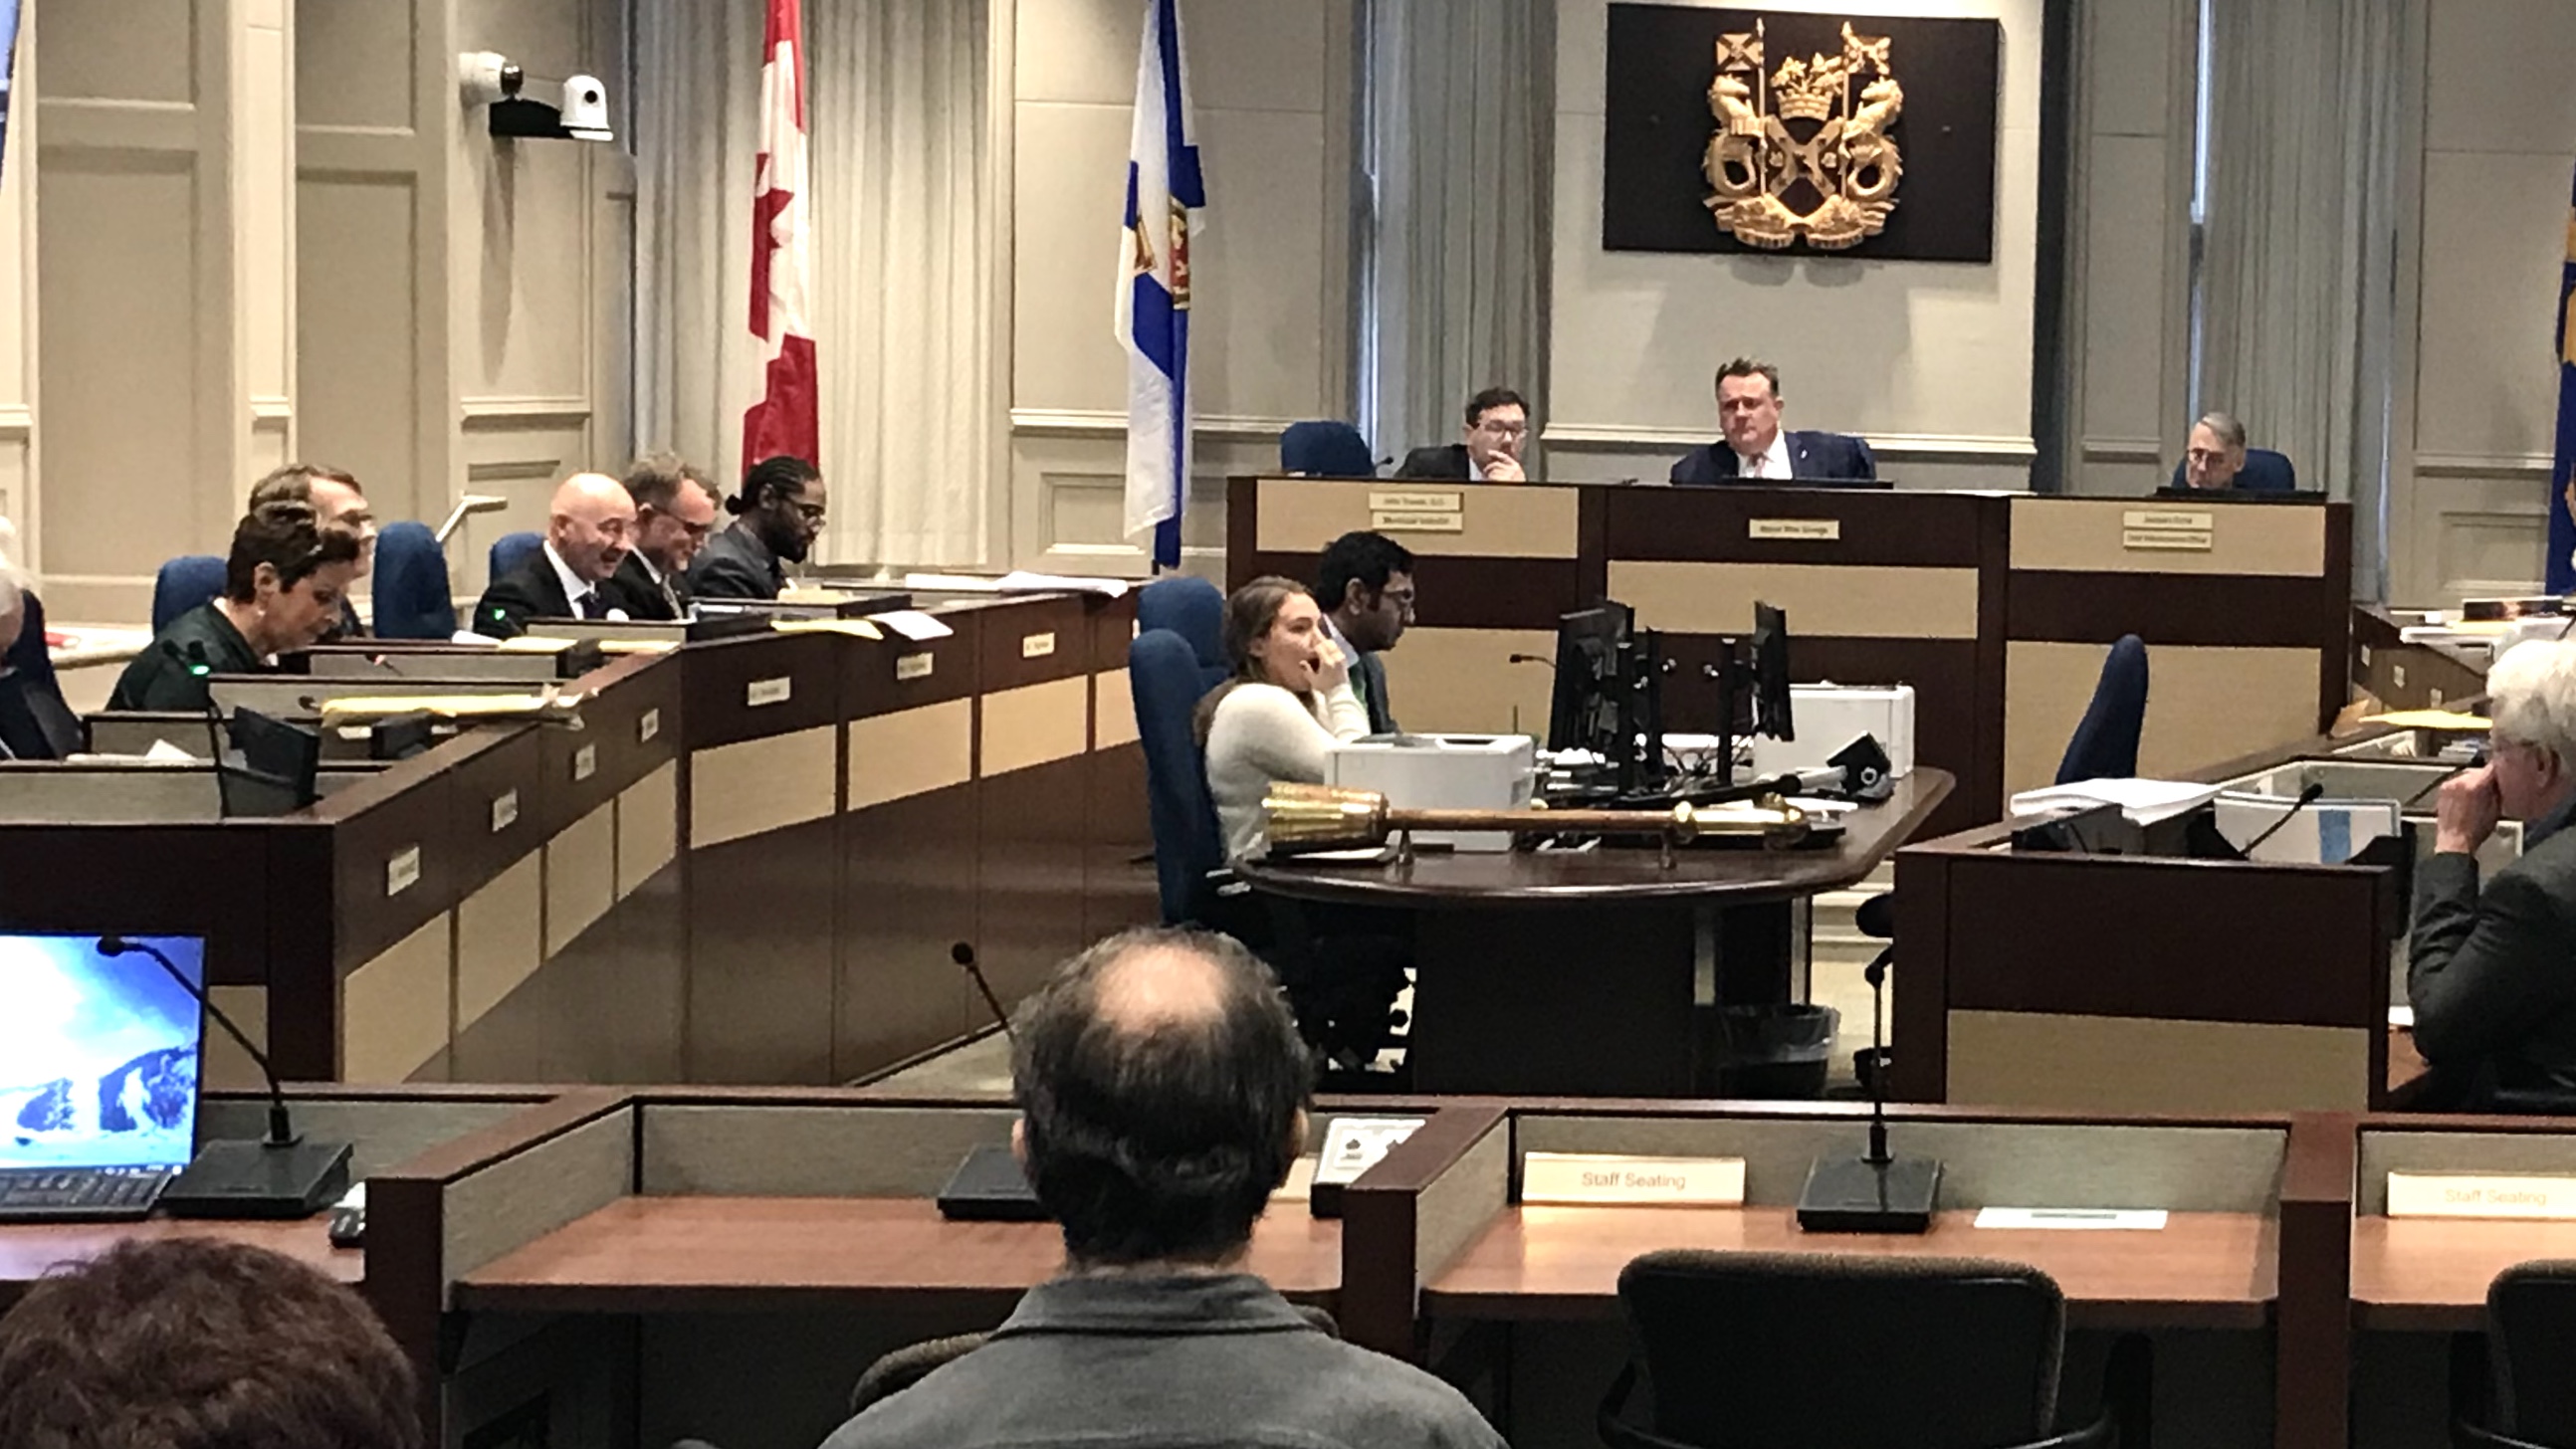 Council voted unanimously Tuesday in support of the Halifax Food Policy Alliance.